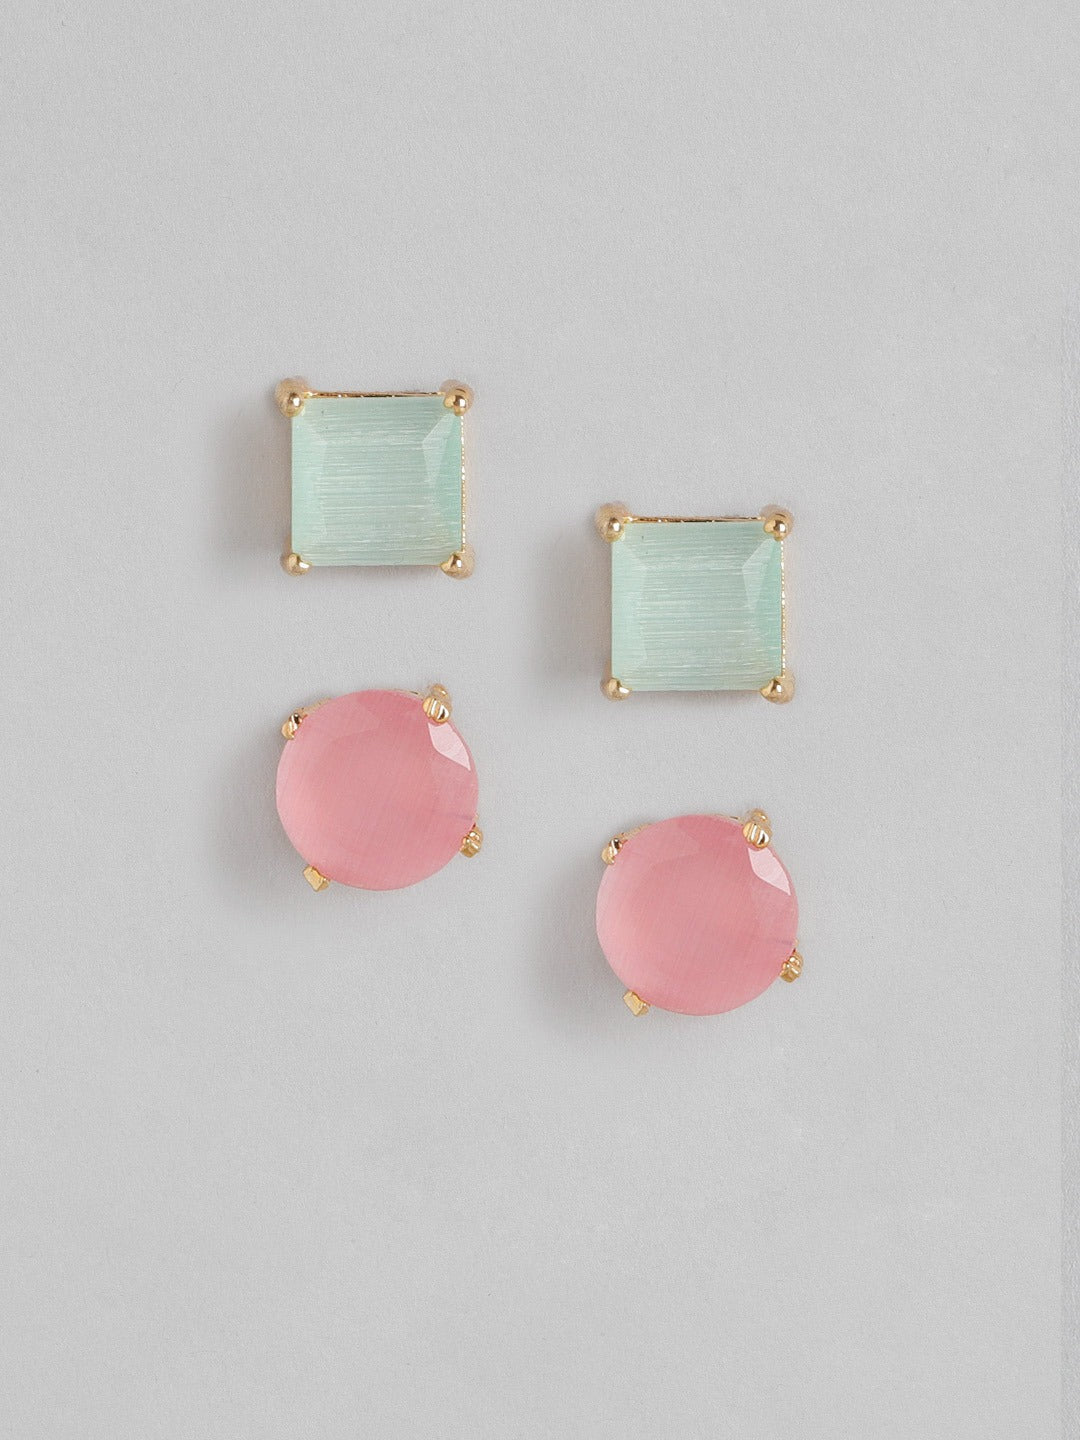 Blueberry set of 2 pink and mint stone stud earring